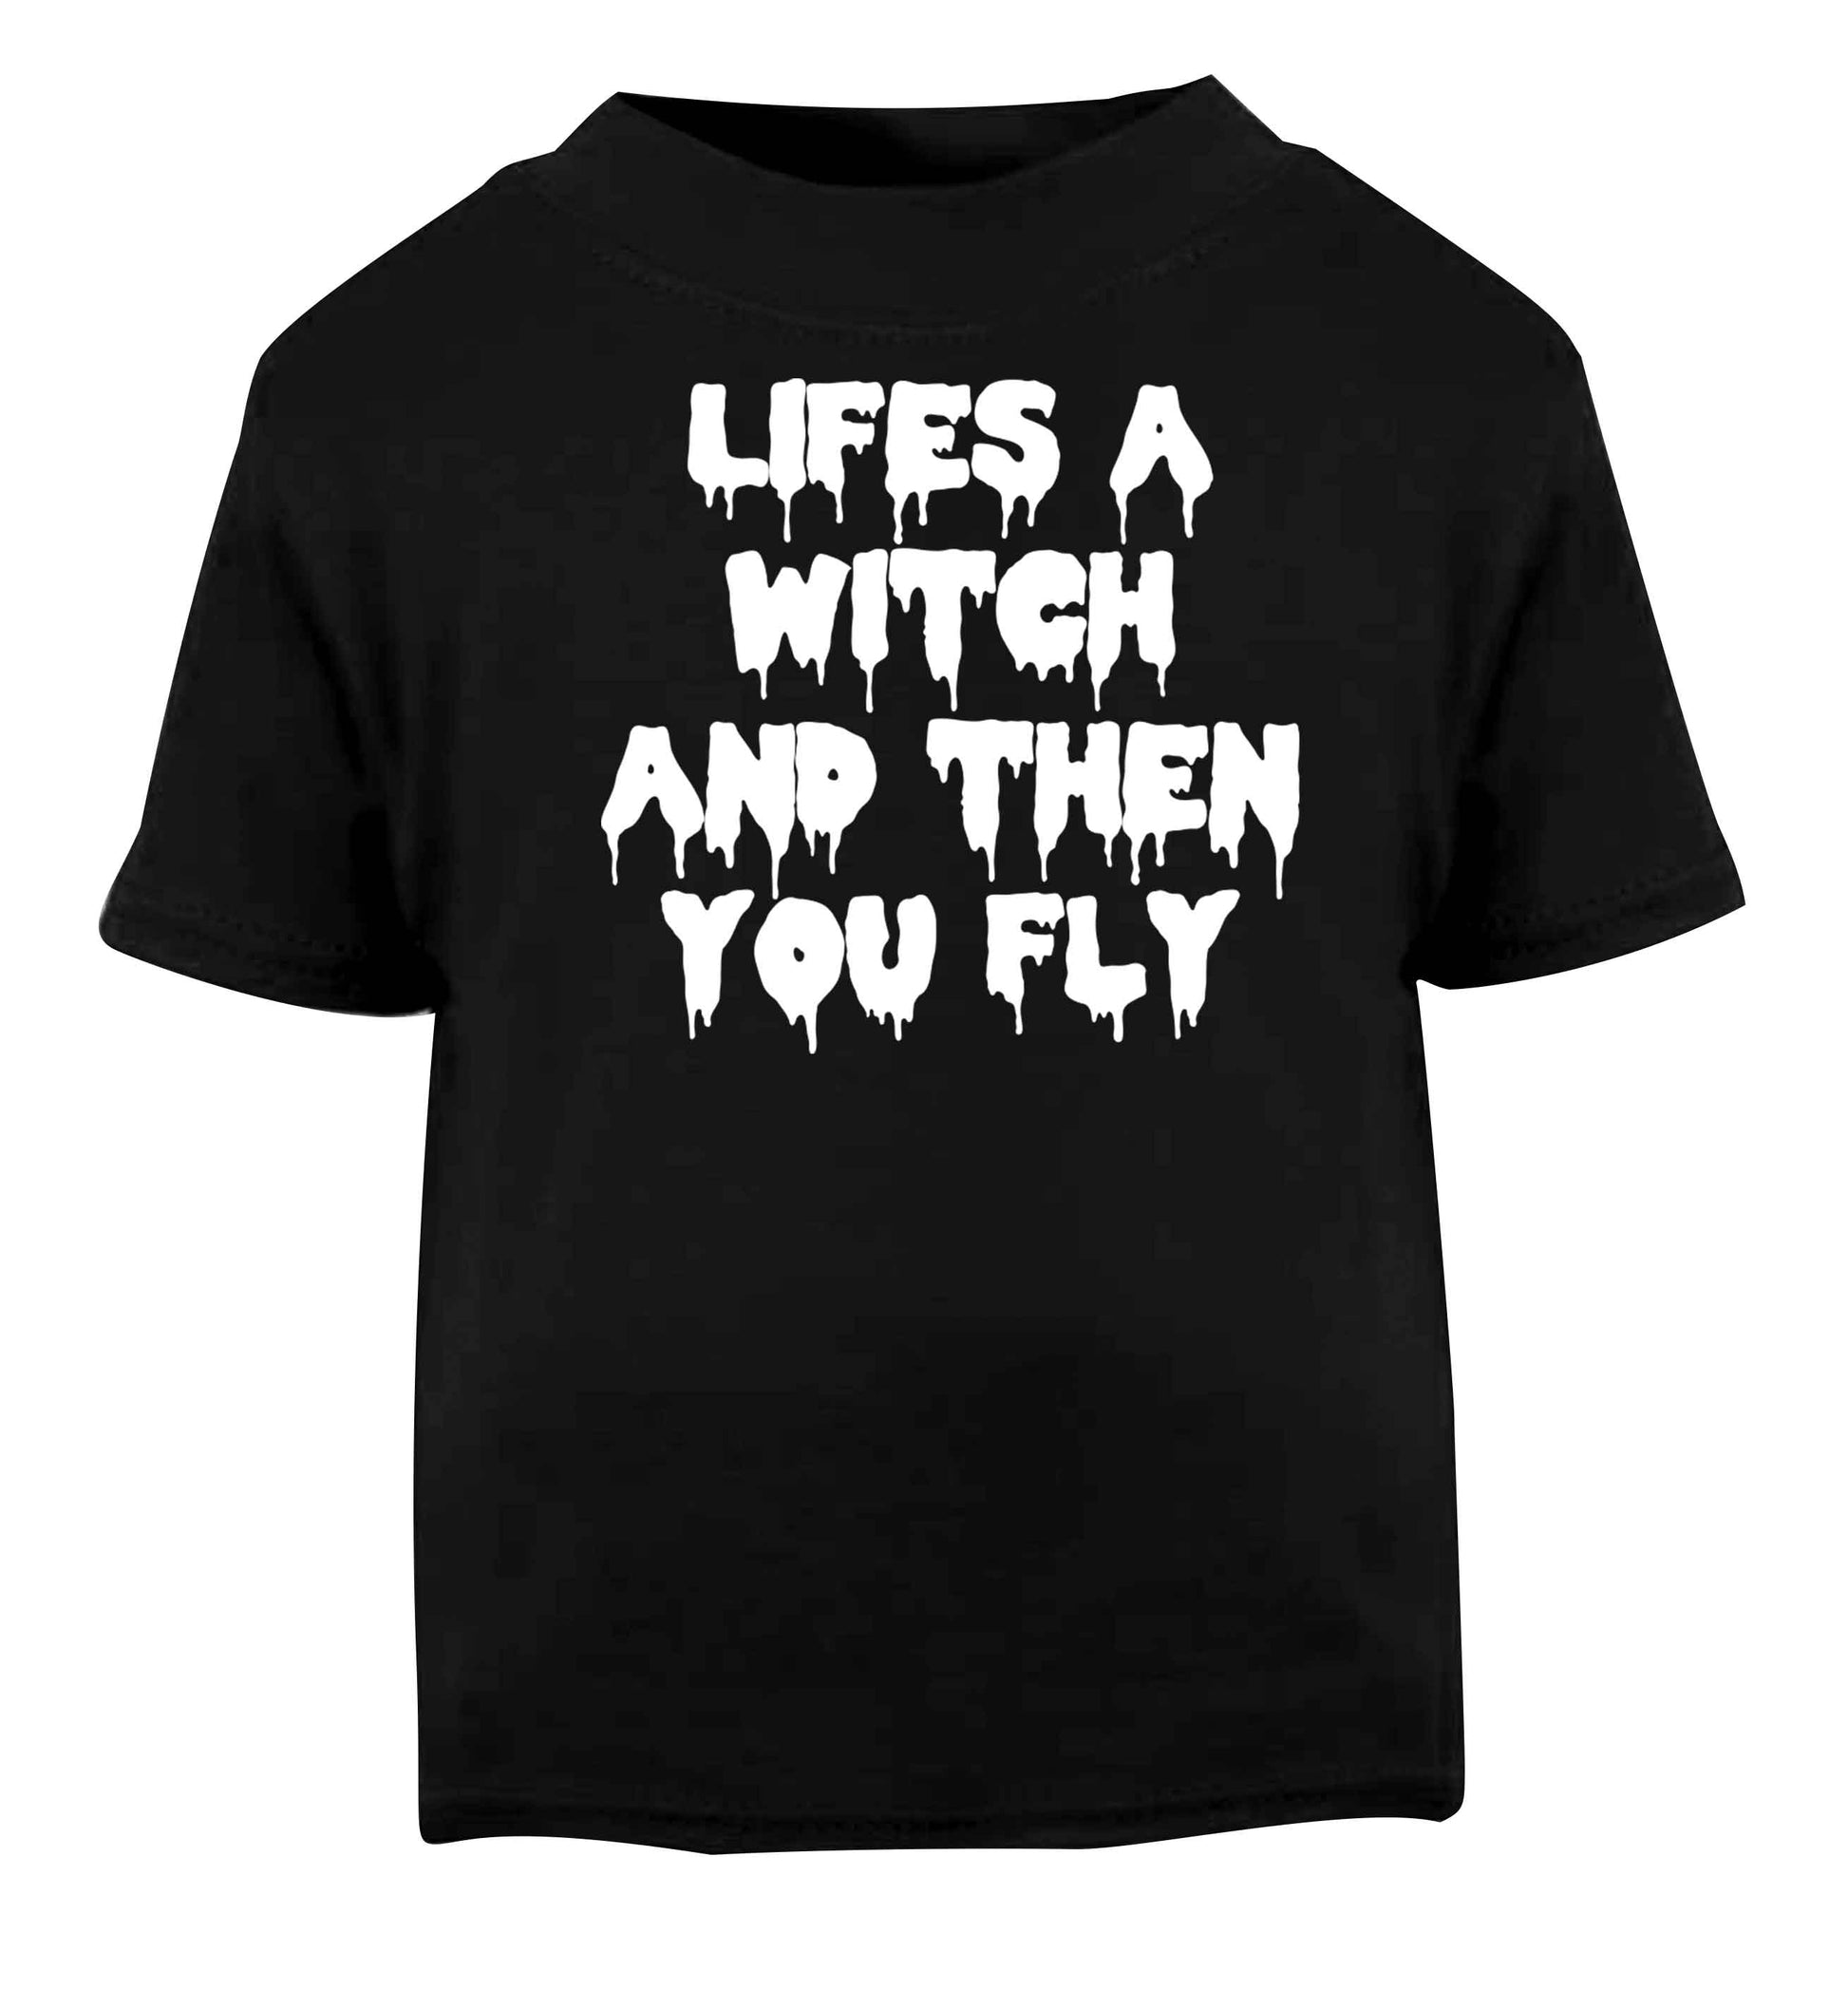 Life's a witch and then you fly Black baby toddler Tshirt 2 years